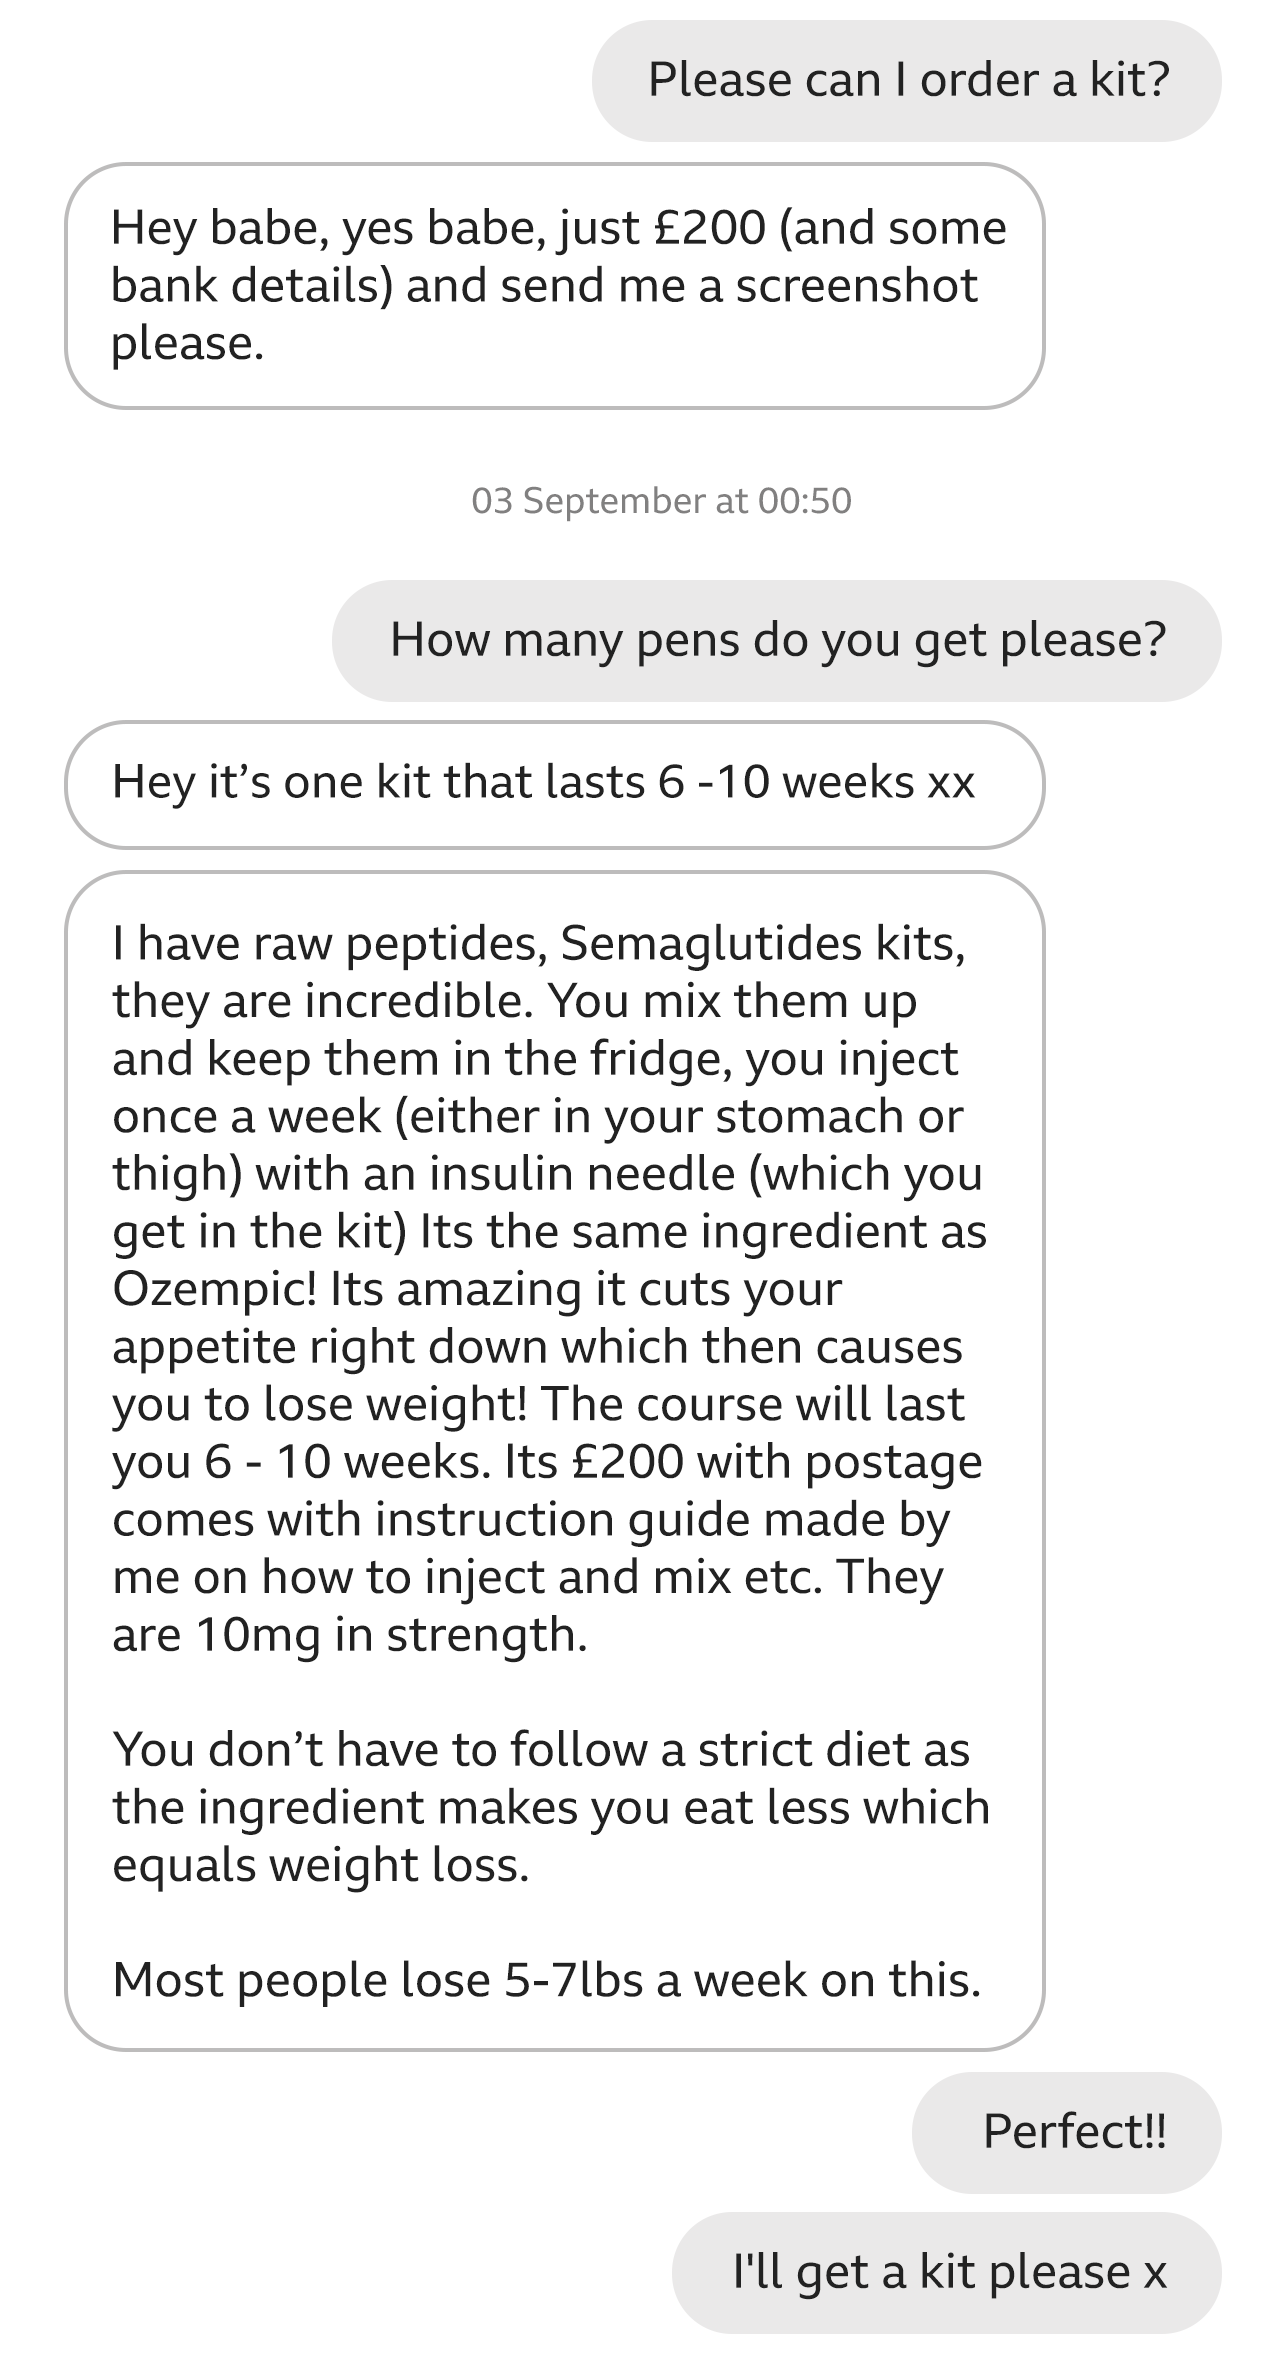 An Instagram conversation between the Lip King, who is selling semaglutide, and Maddy who is interested in buying it